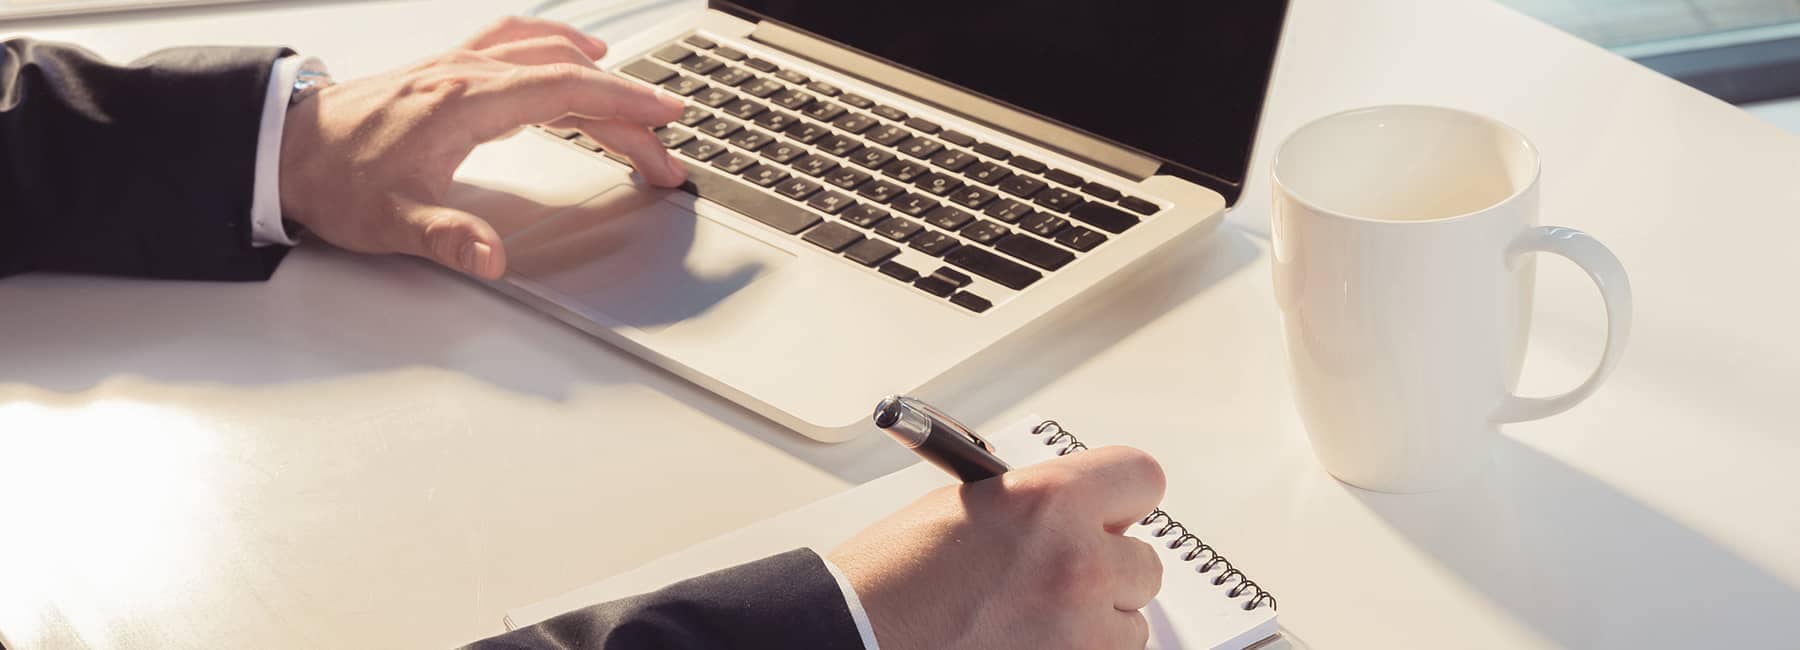 Hand pressing spacebar on a laptop while writing a note on a notepad